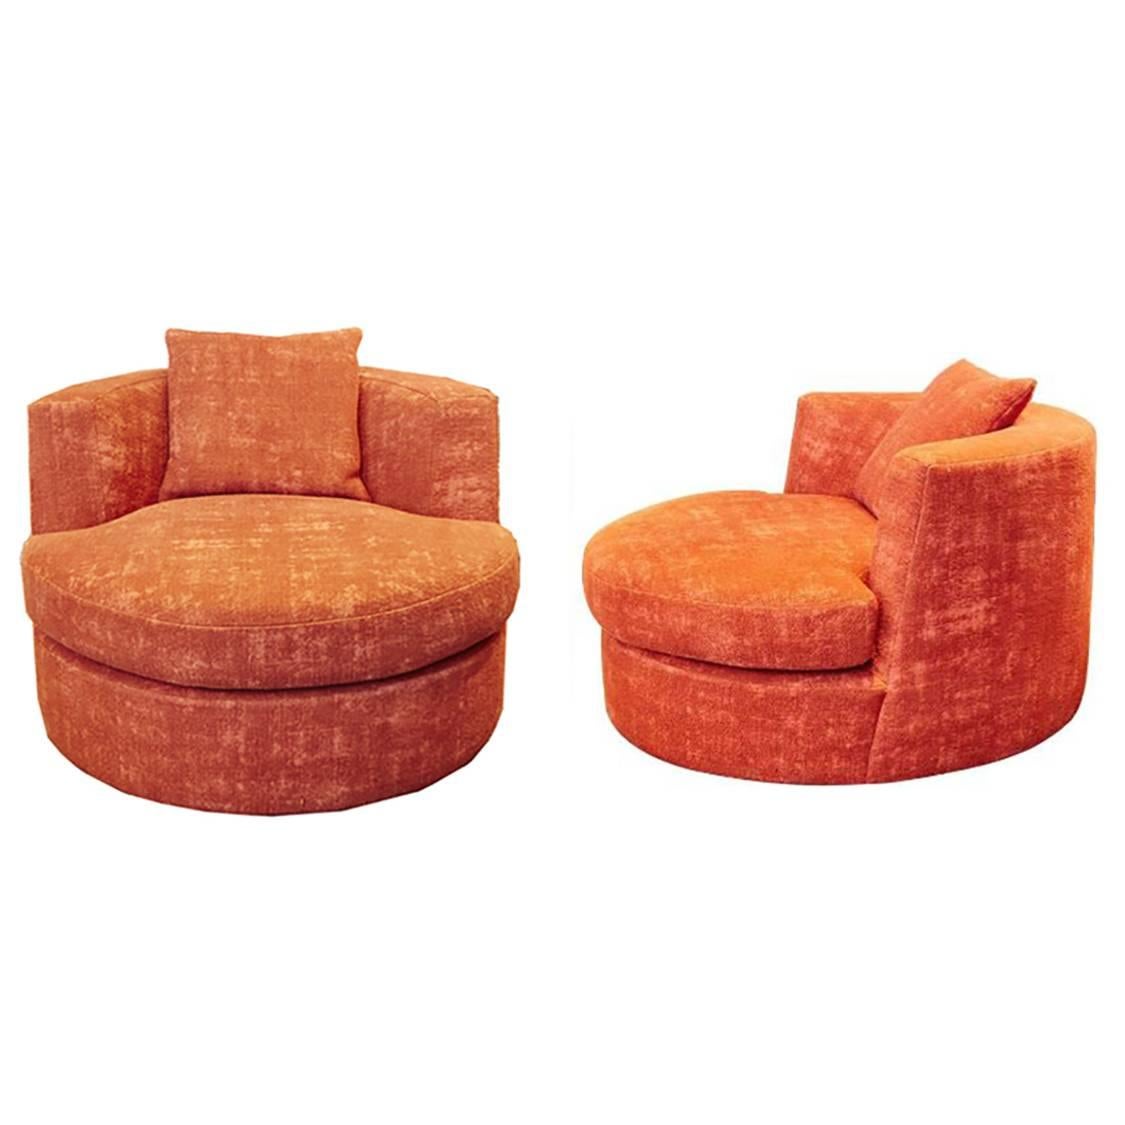 Pair of Upholstered Swivel Chairs Designed by Apsara Interior Design For Sale